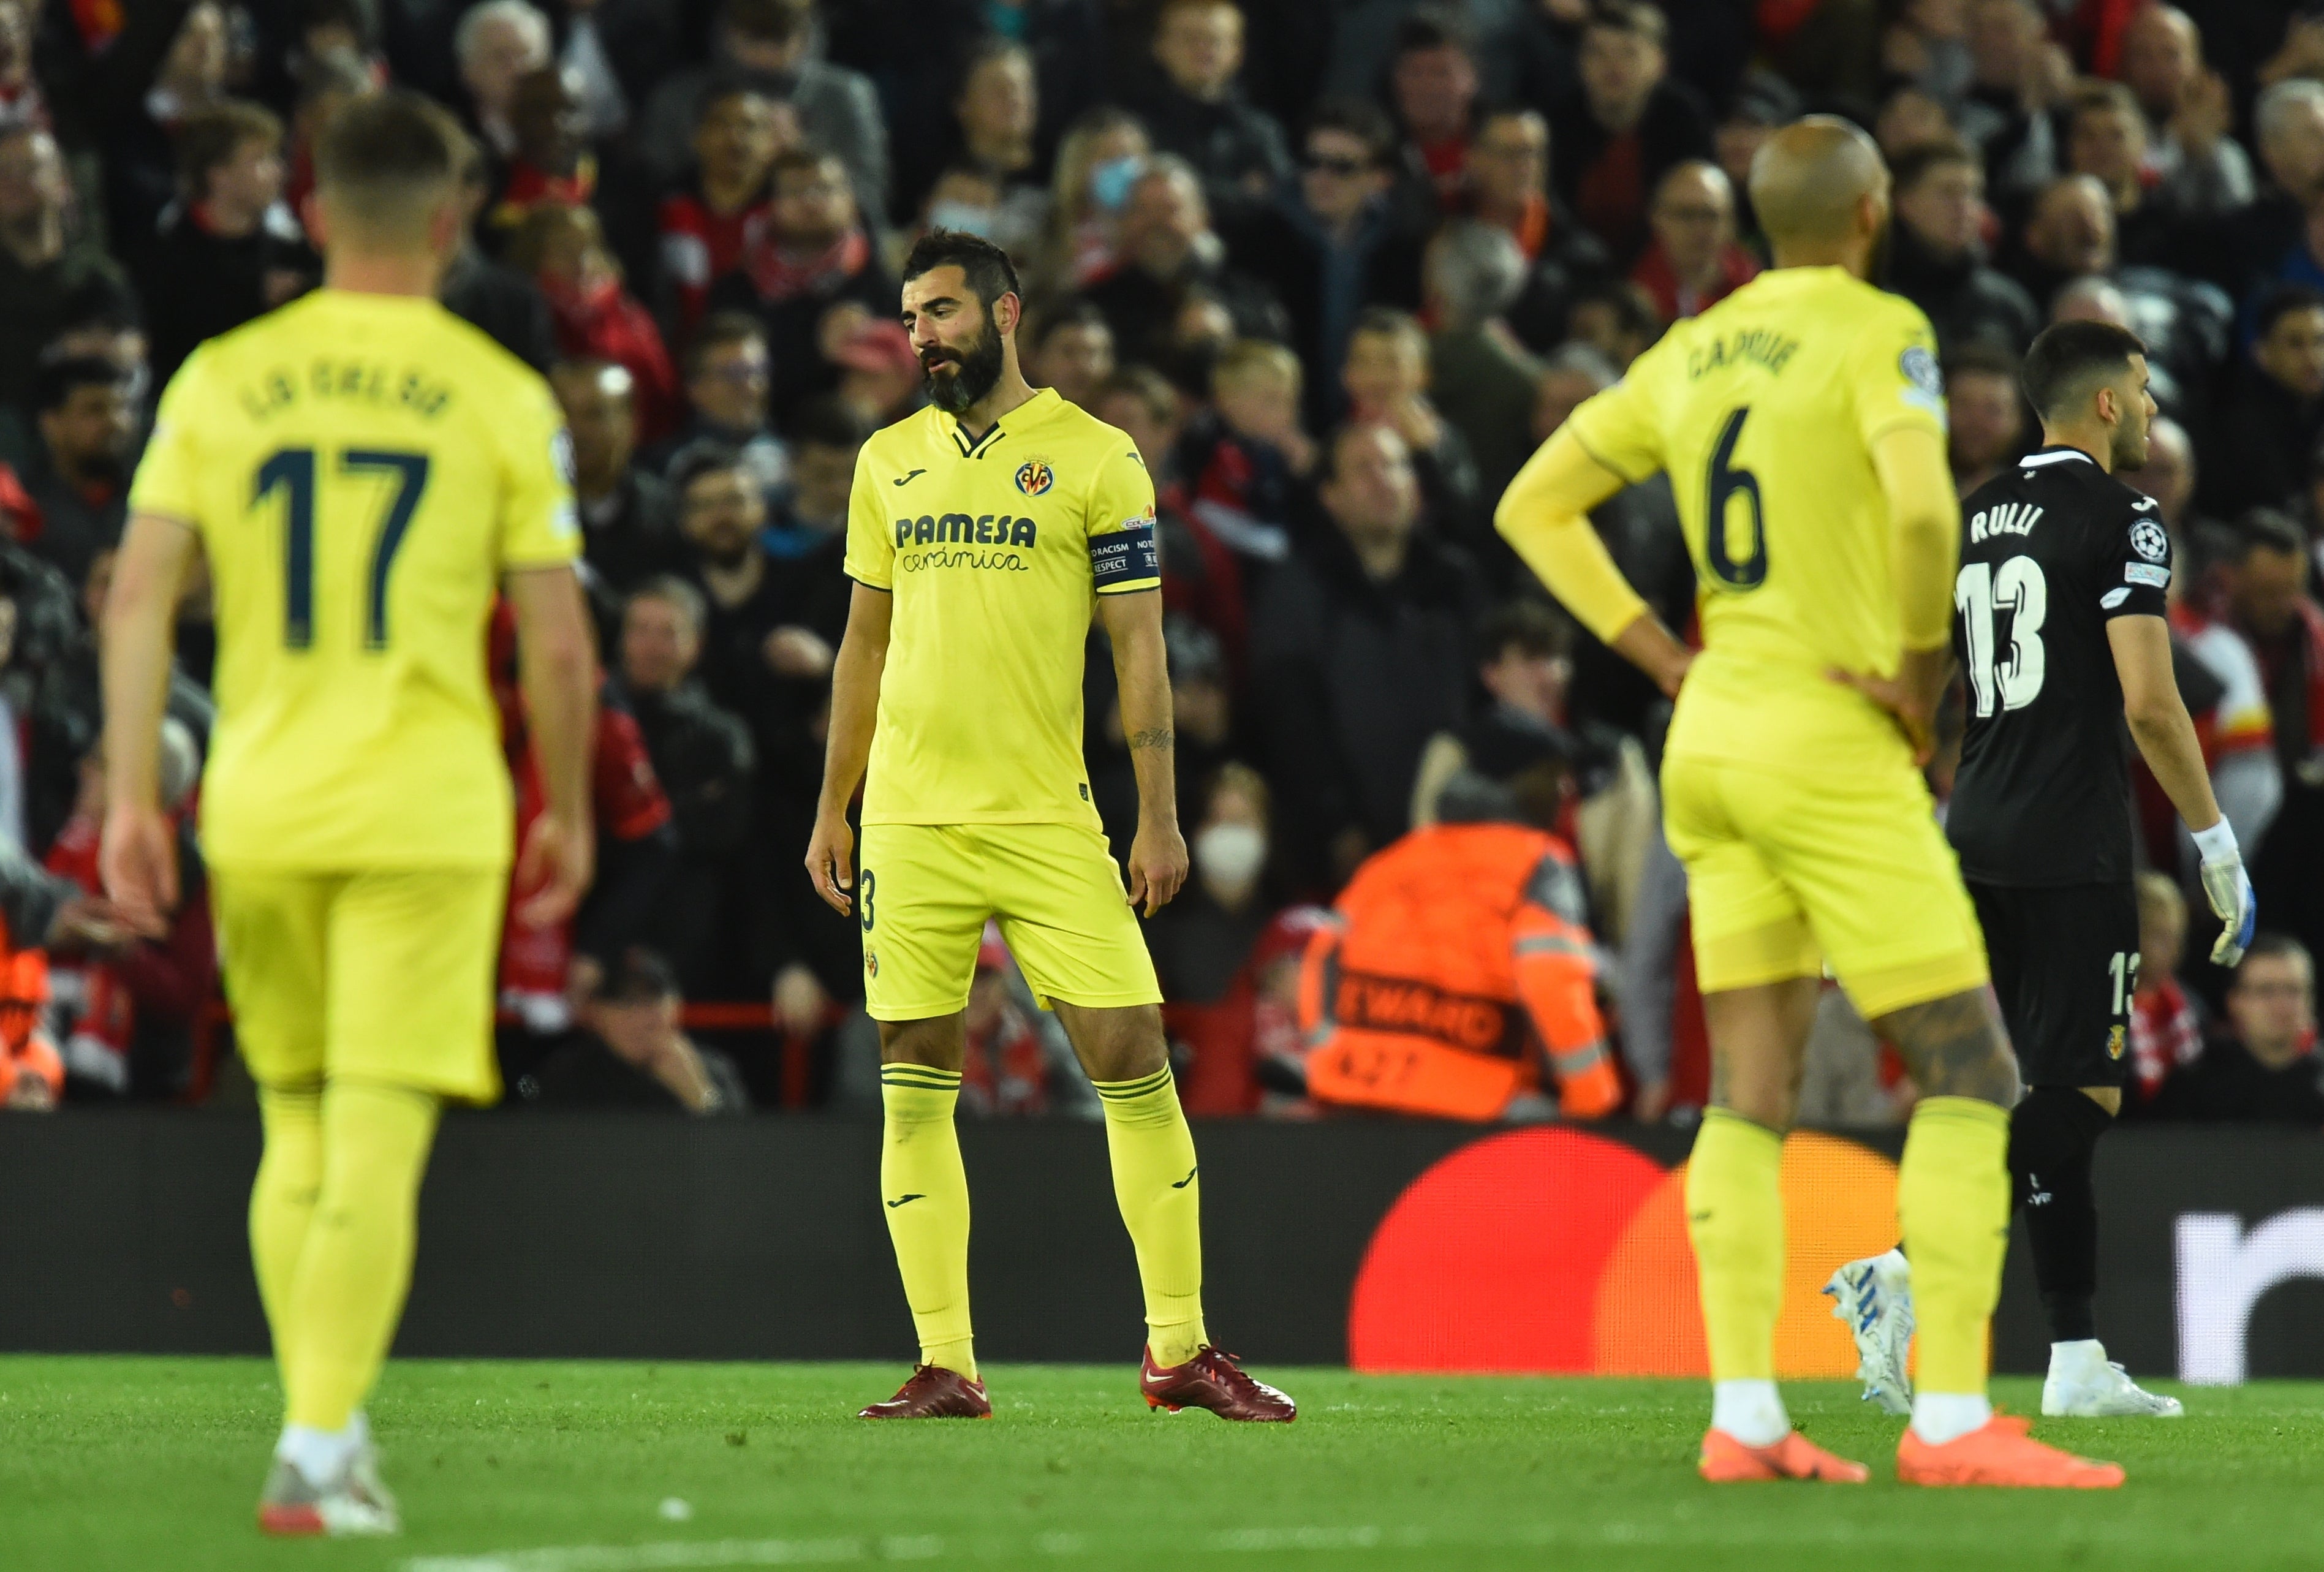 Villarreal were downed 2-0 at Anfield